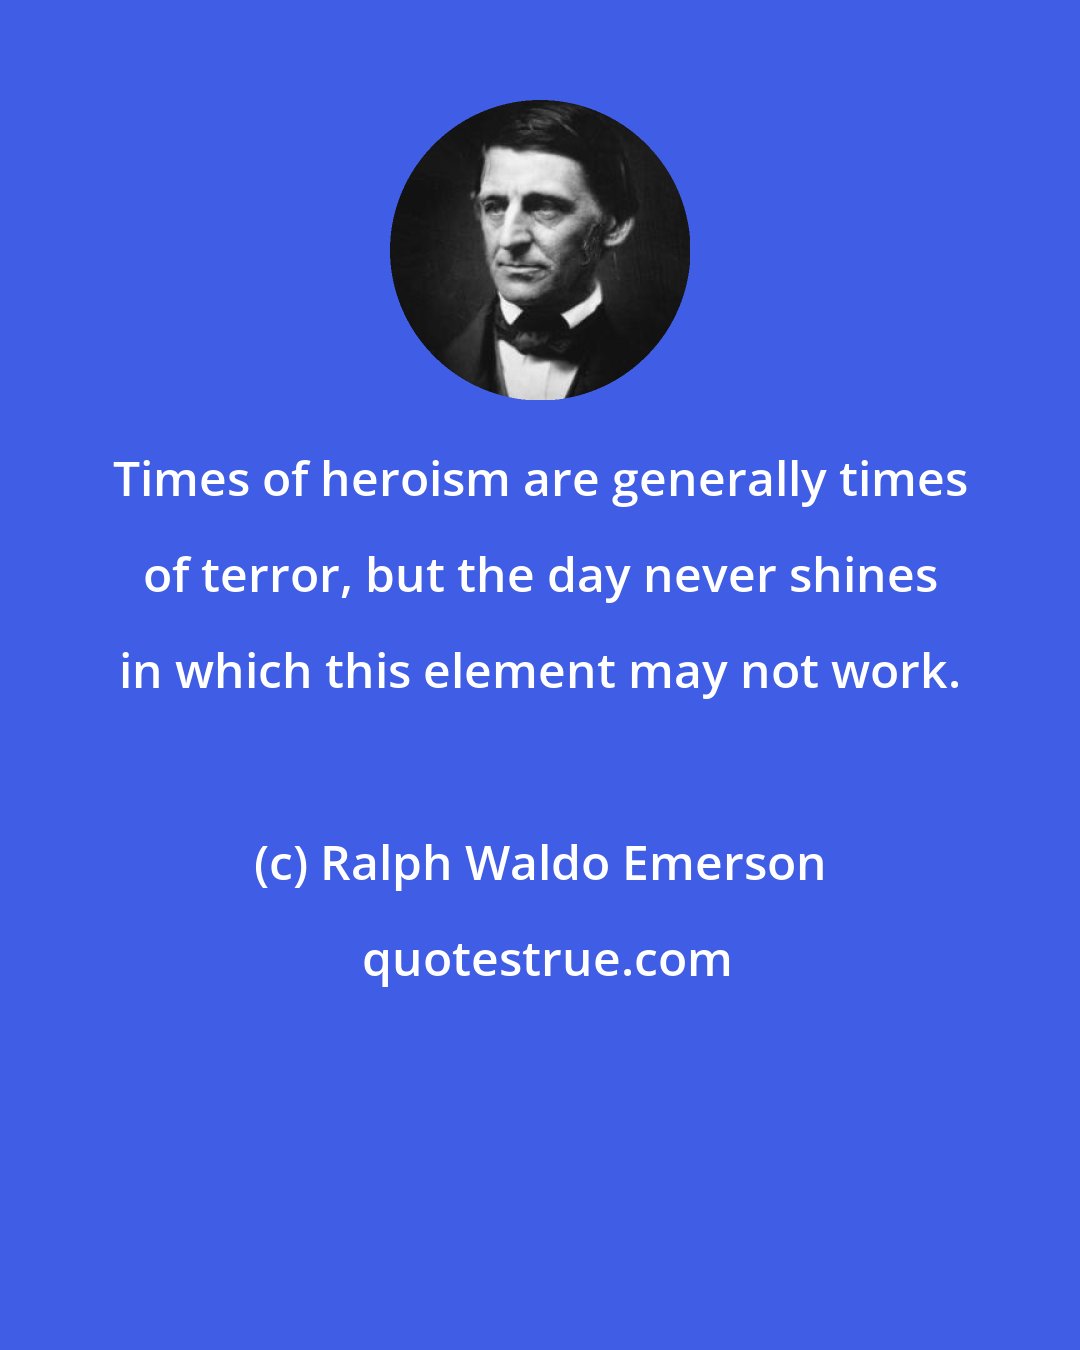 Ralph Waldo Emerson: Times of heroism are generally times of terror, but the day never shines in which this element may not work.